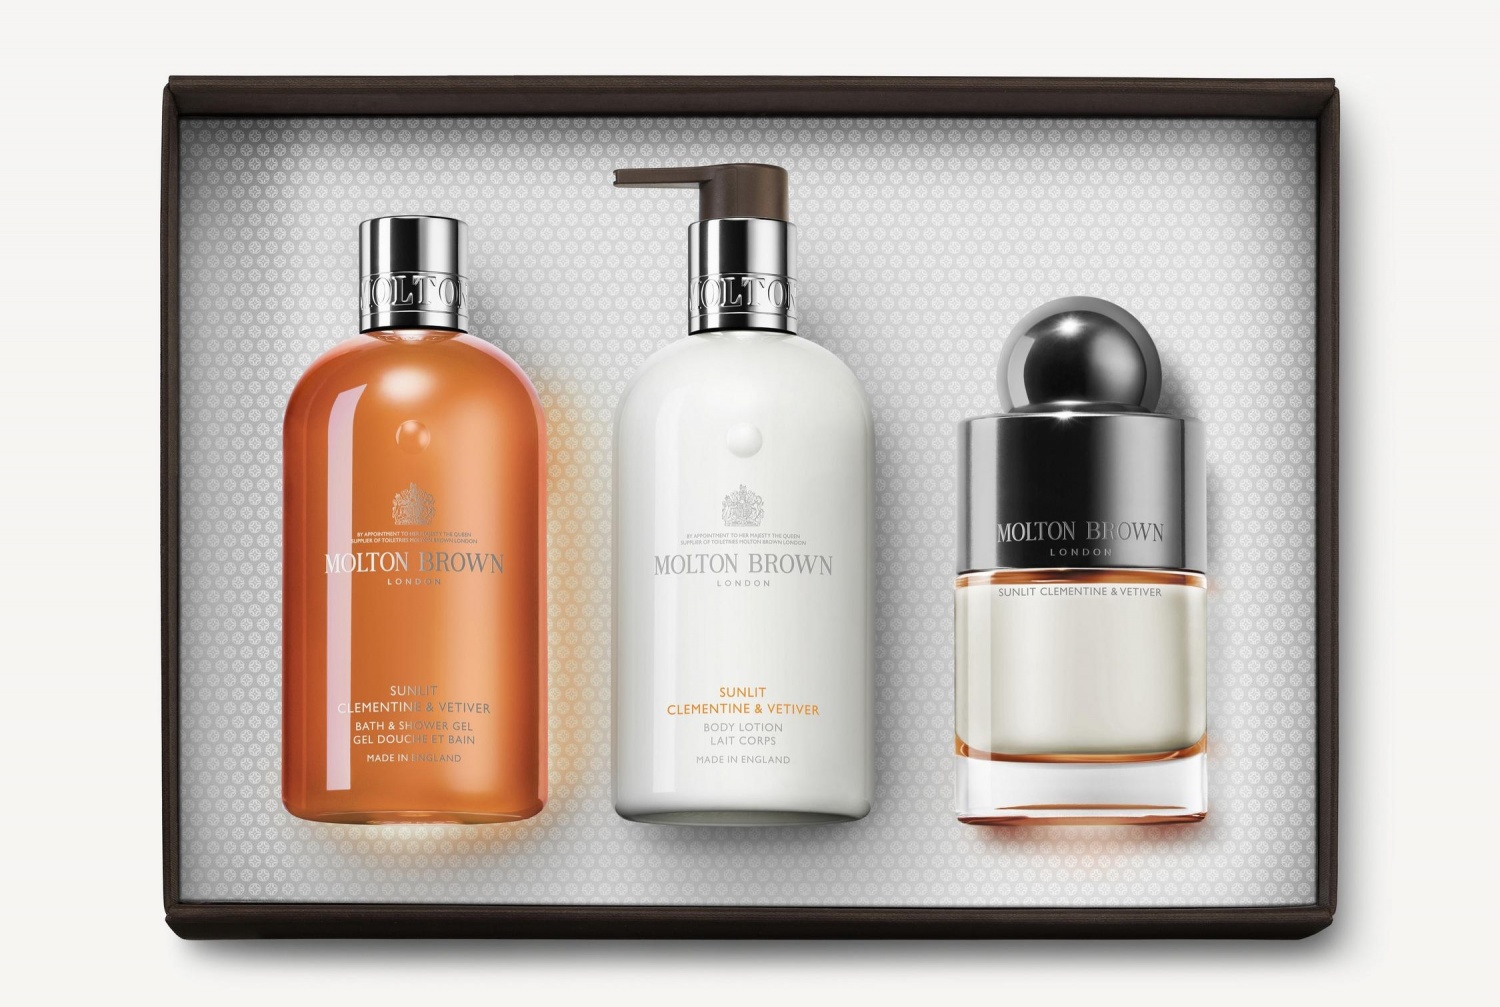 Molton Brown Sunlit Clementine & Vetiver Collection